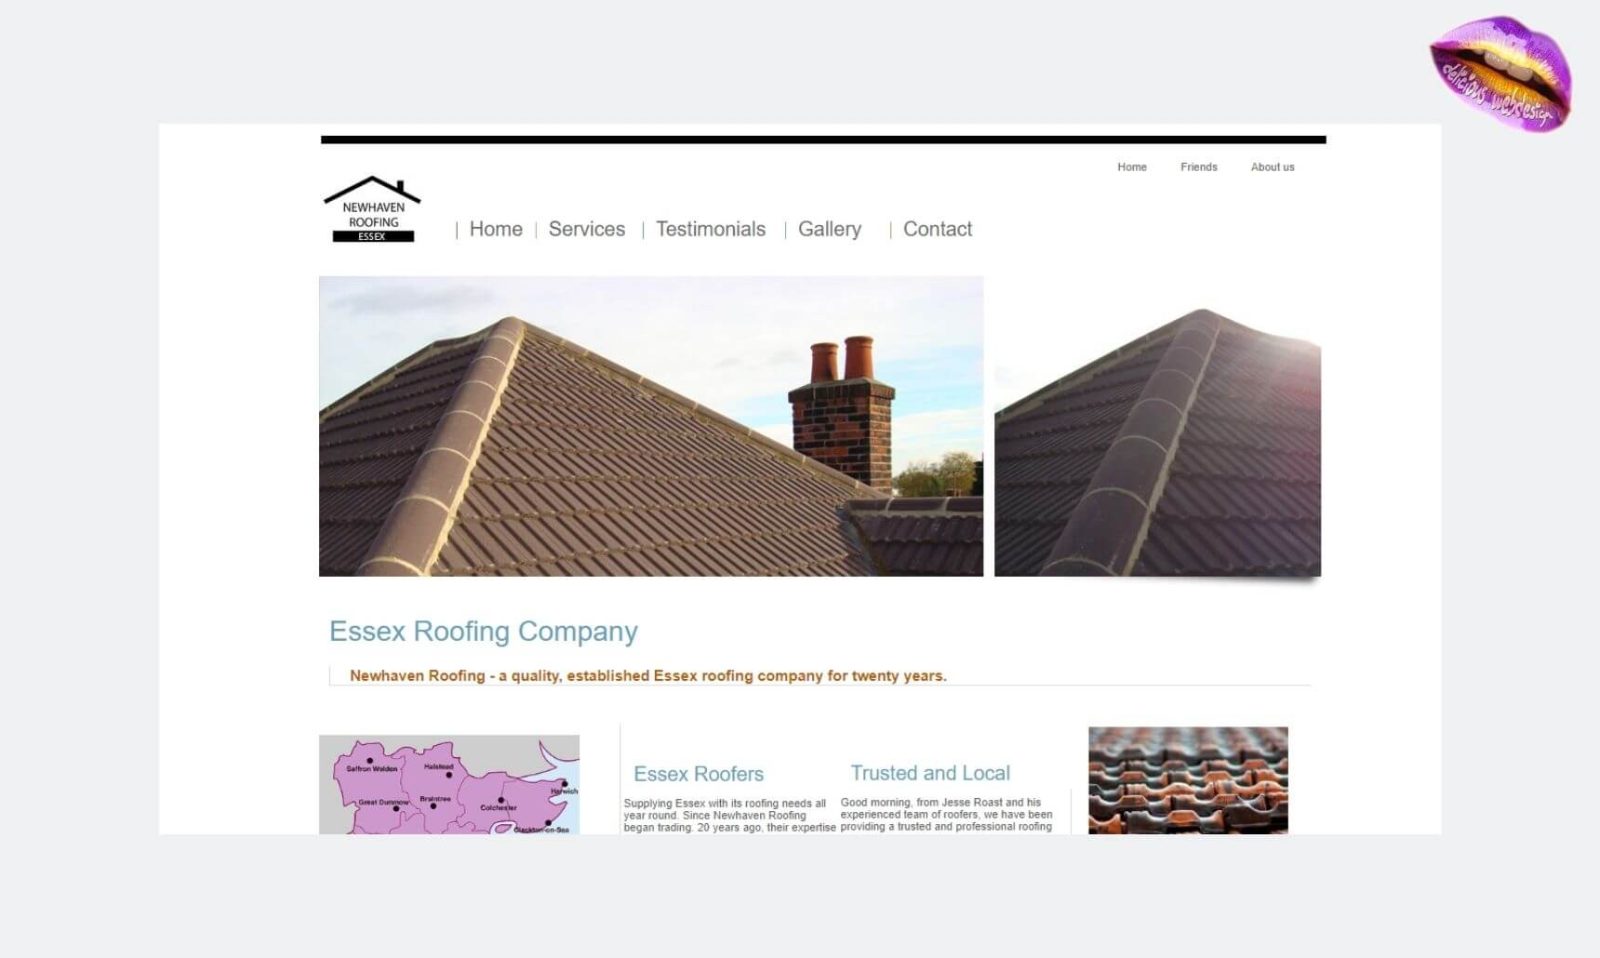 Newhaven Roofing